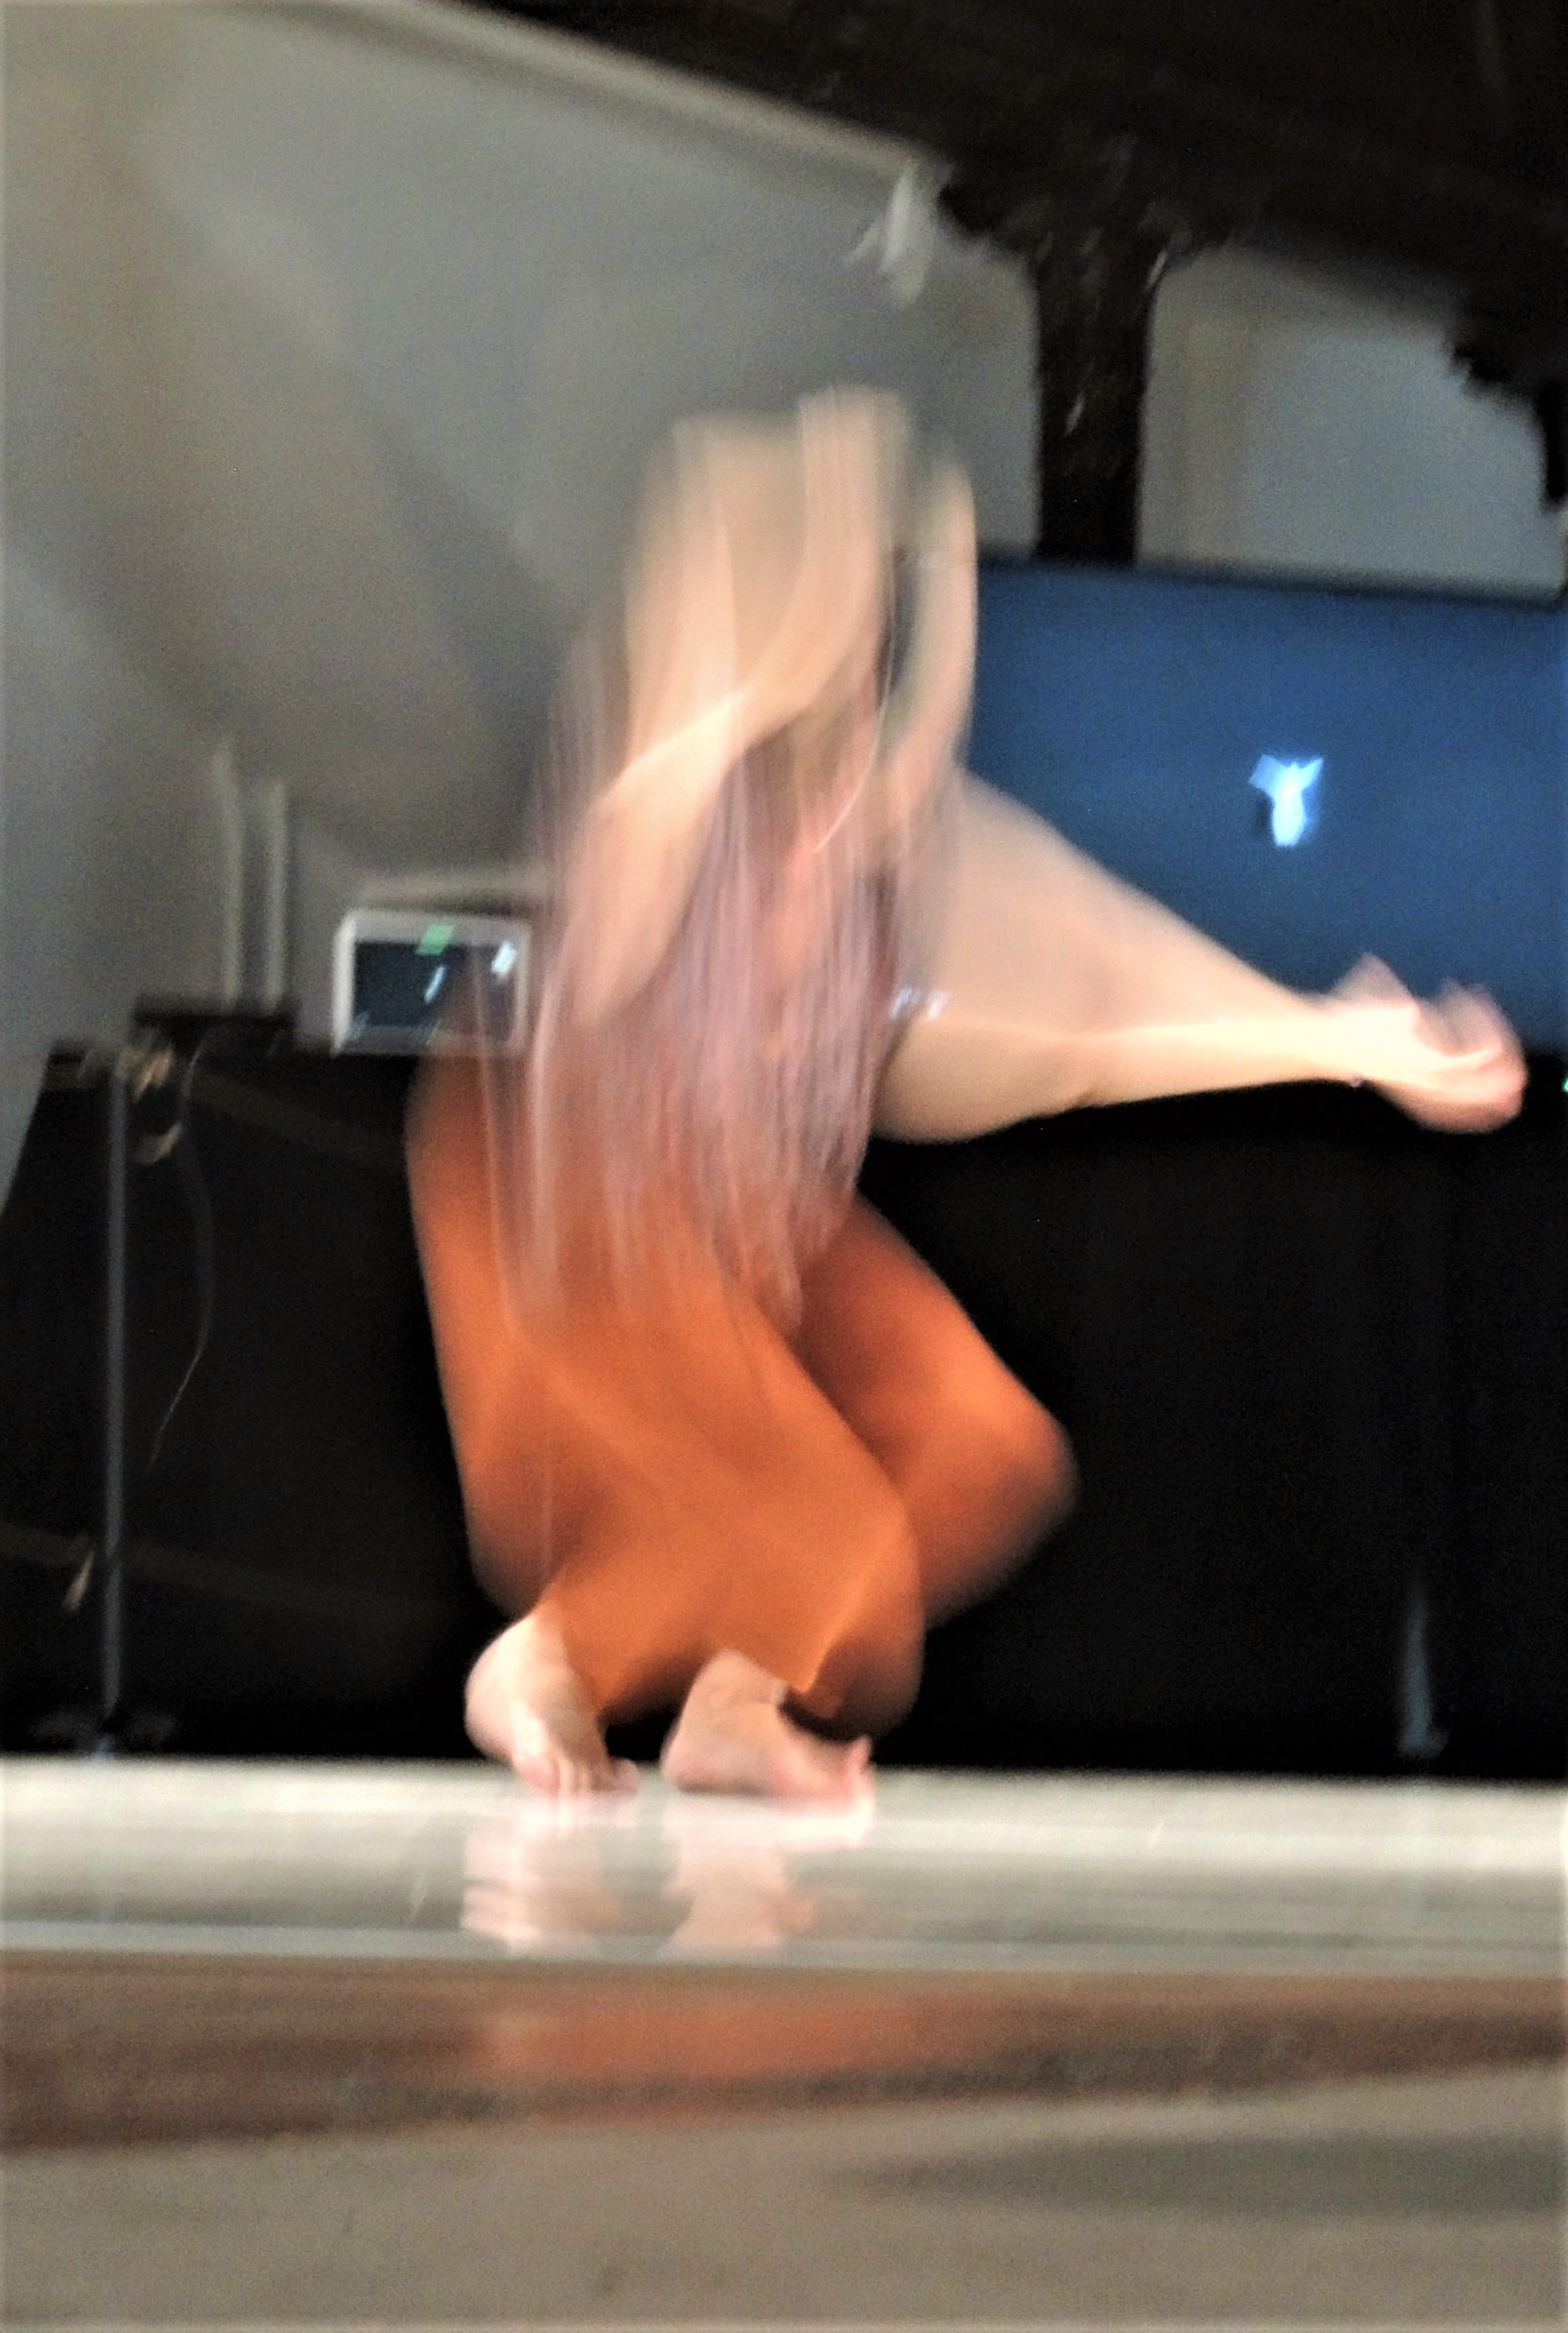 Image of dancer blurred by movement